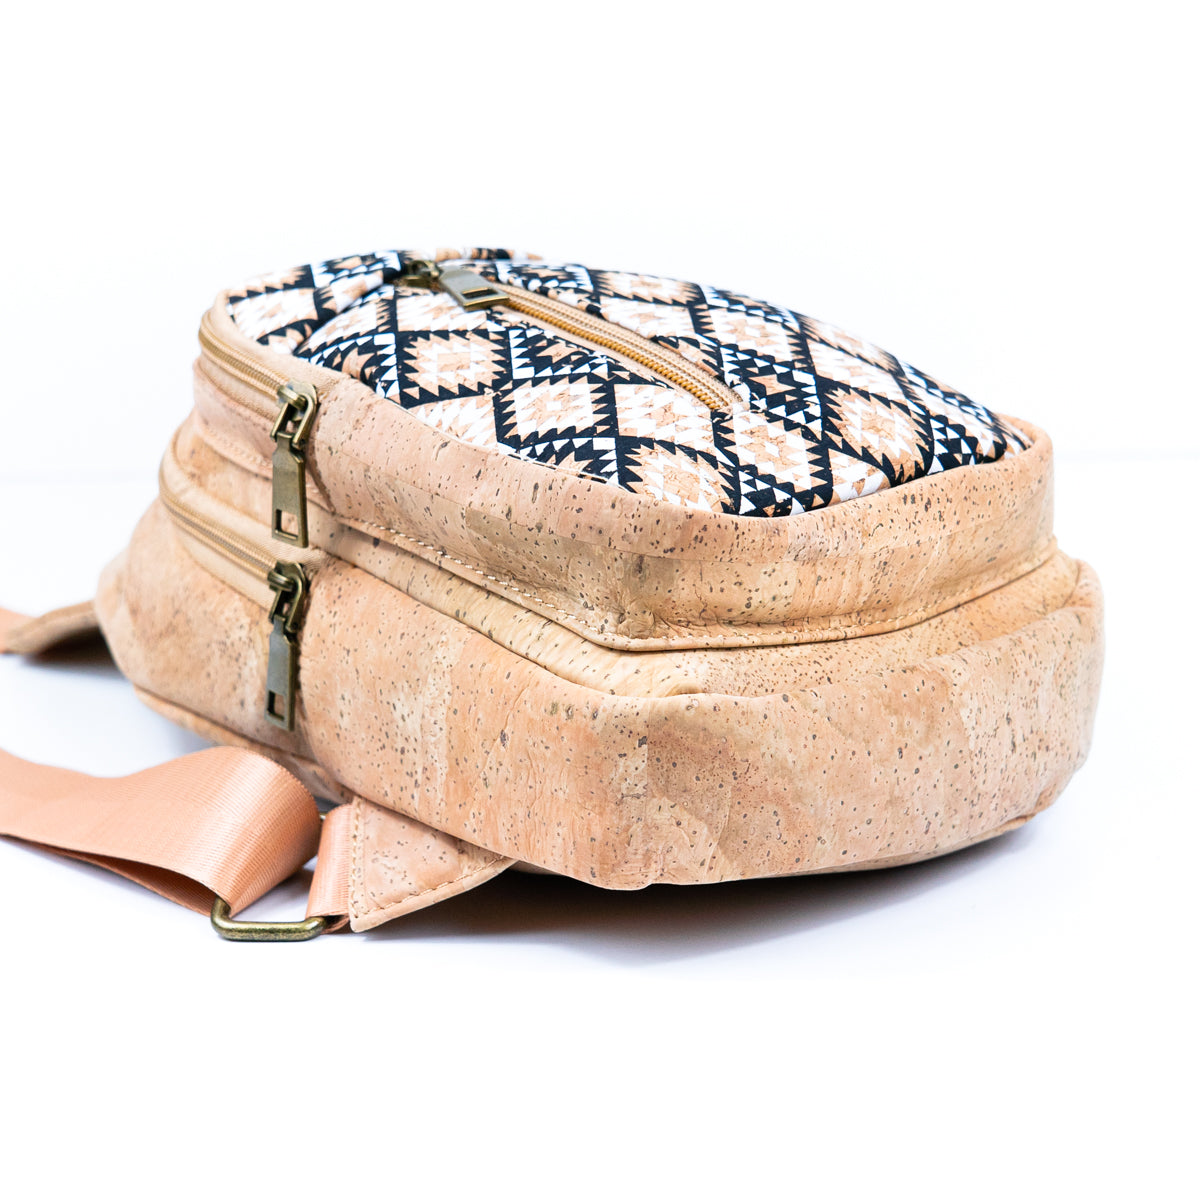 Printed Cork Women's Chest Bag Sling Bag | THE CORK COLLECTION